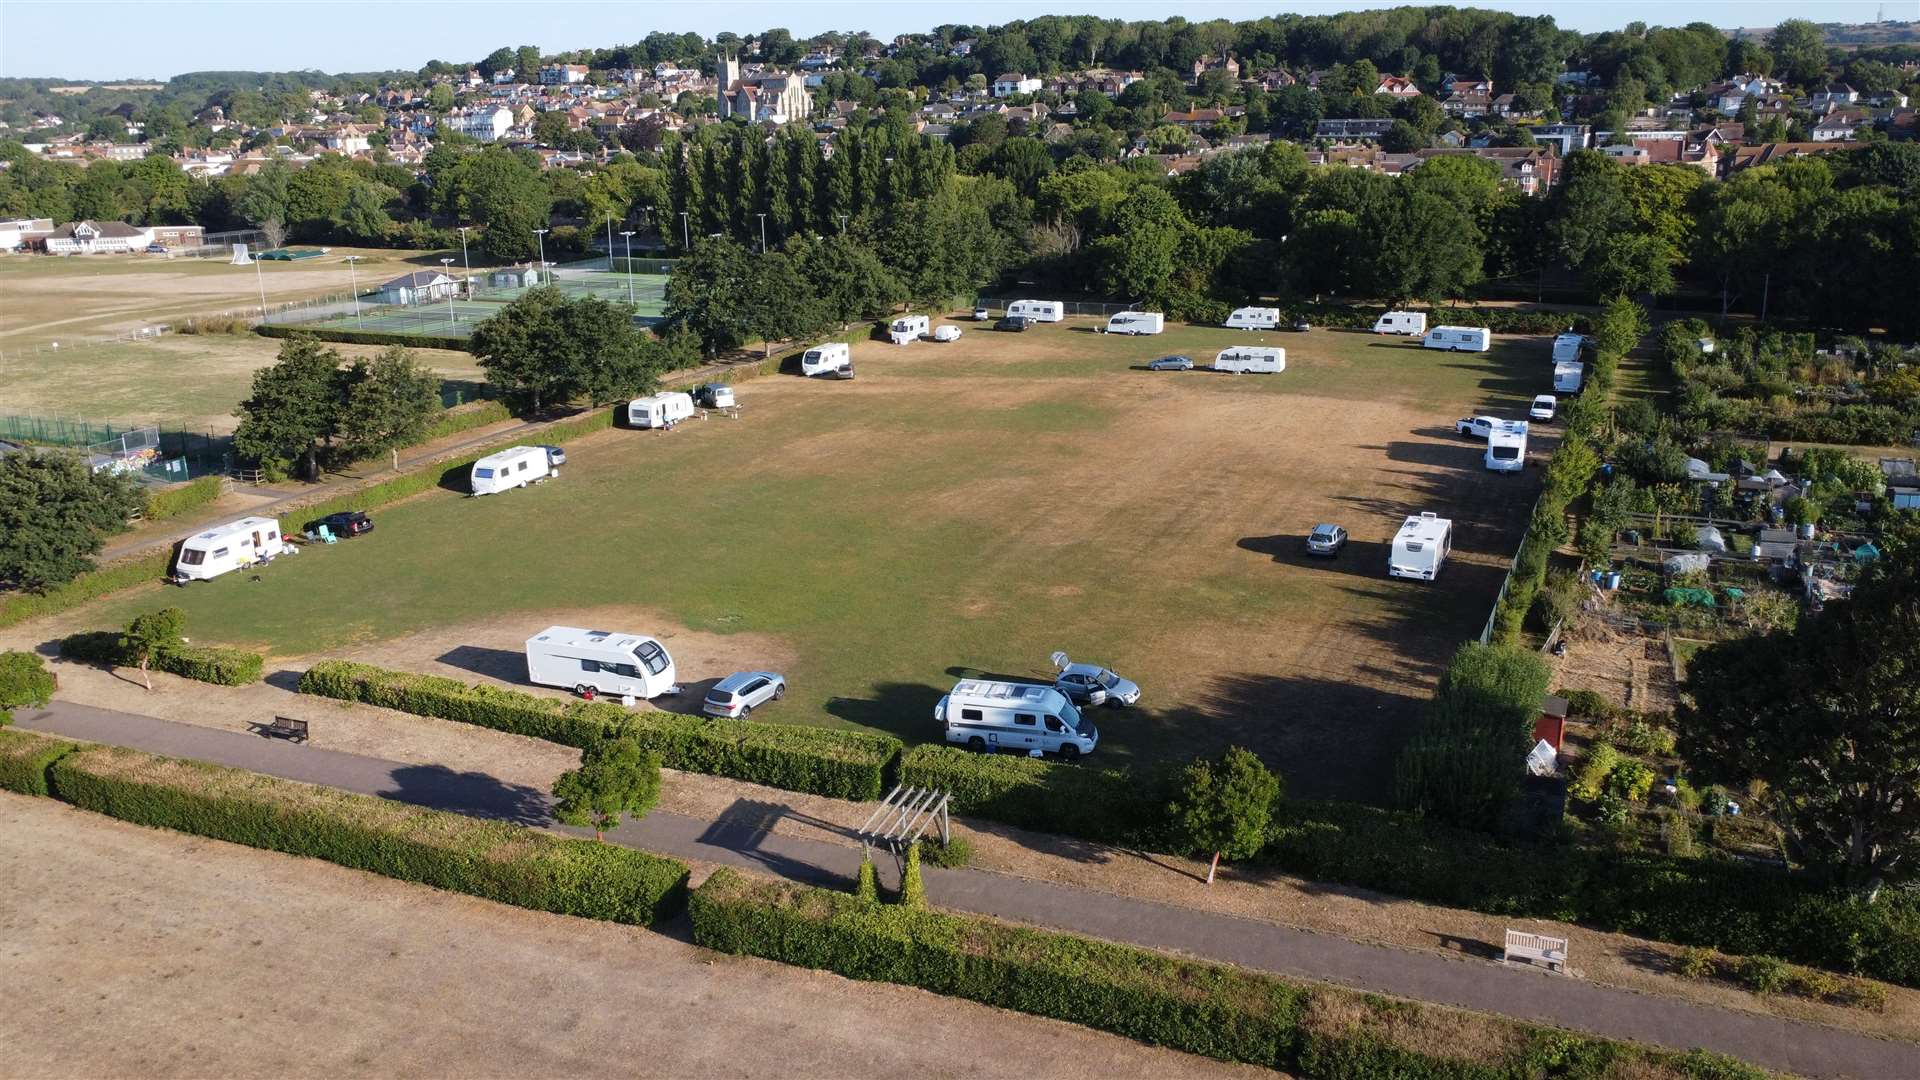 Travellers at the South Road recreation fields, Hythe Kent earlier this month. Picture: Barry Goodwin.